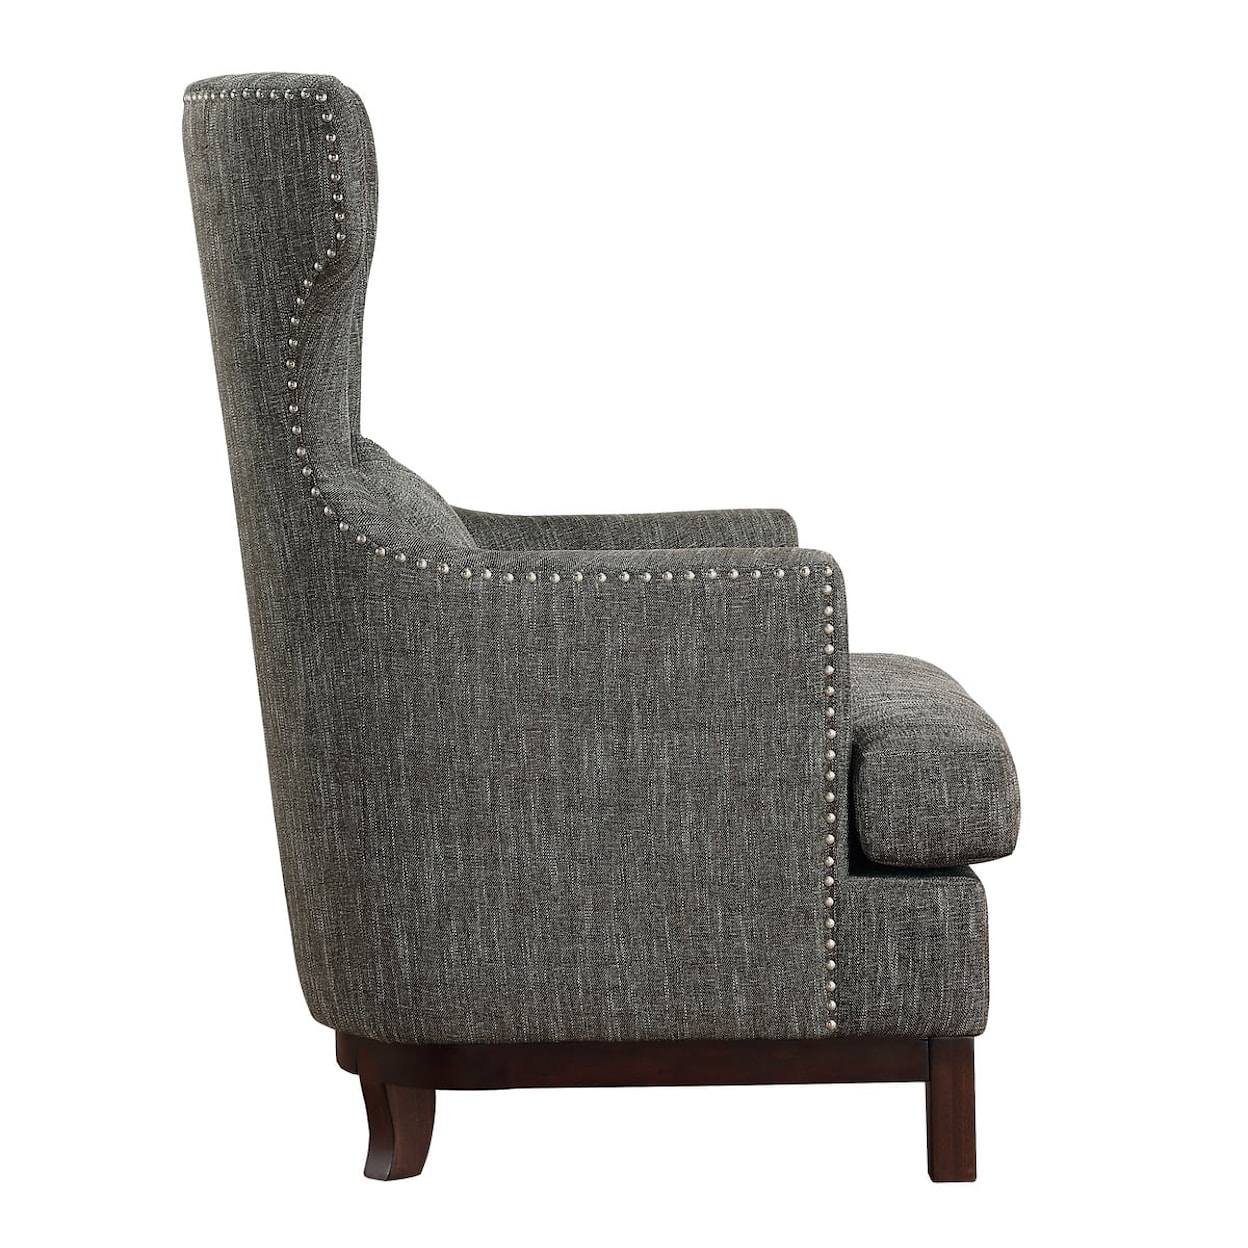 Homelegance Furniture Adriano Accent Chair